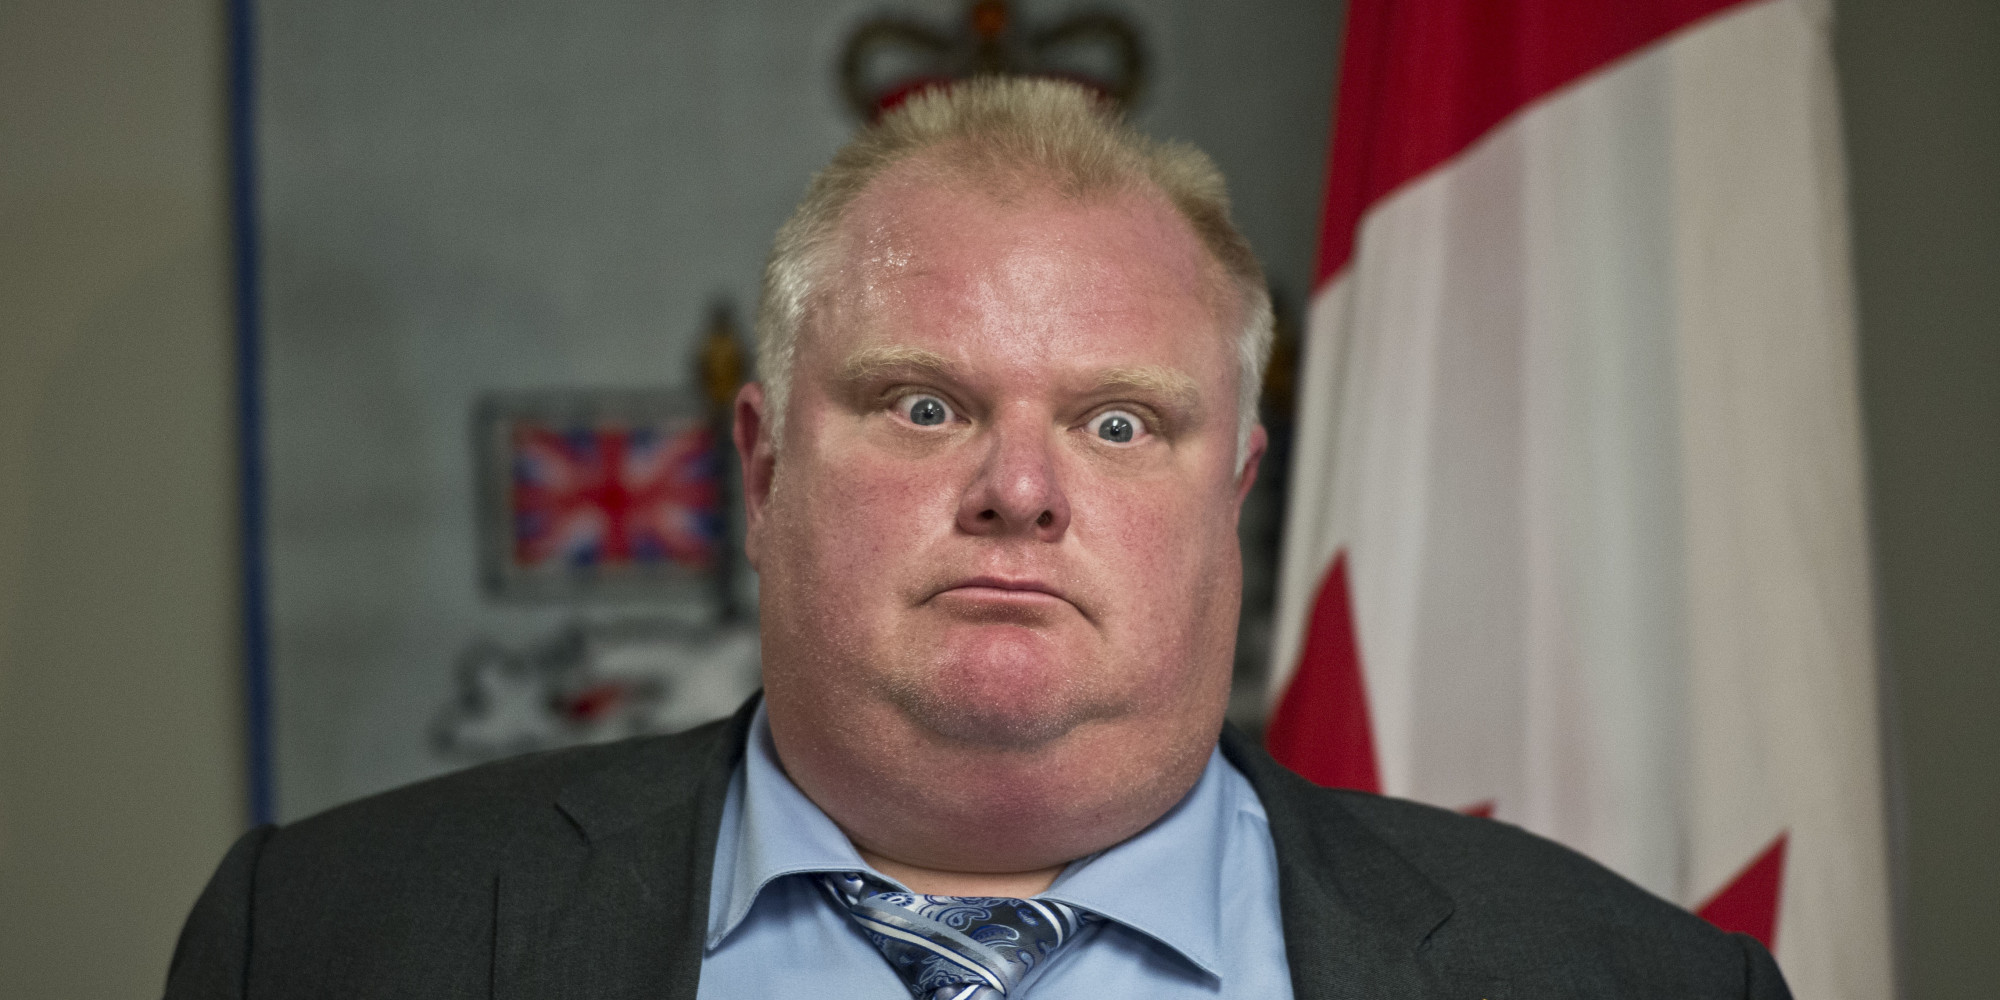 Rob ford and layoffs #1